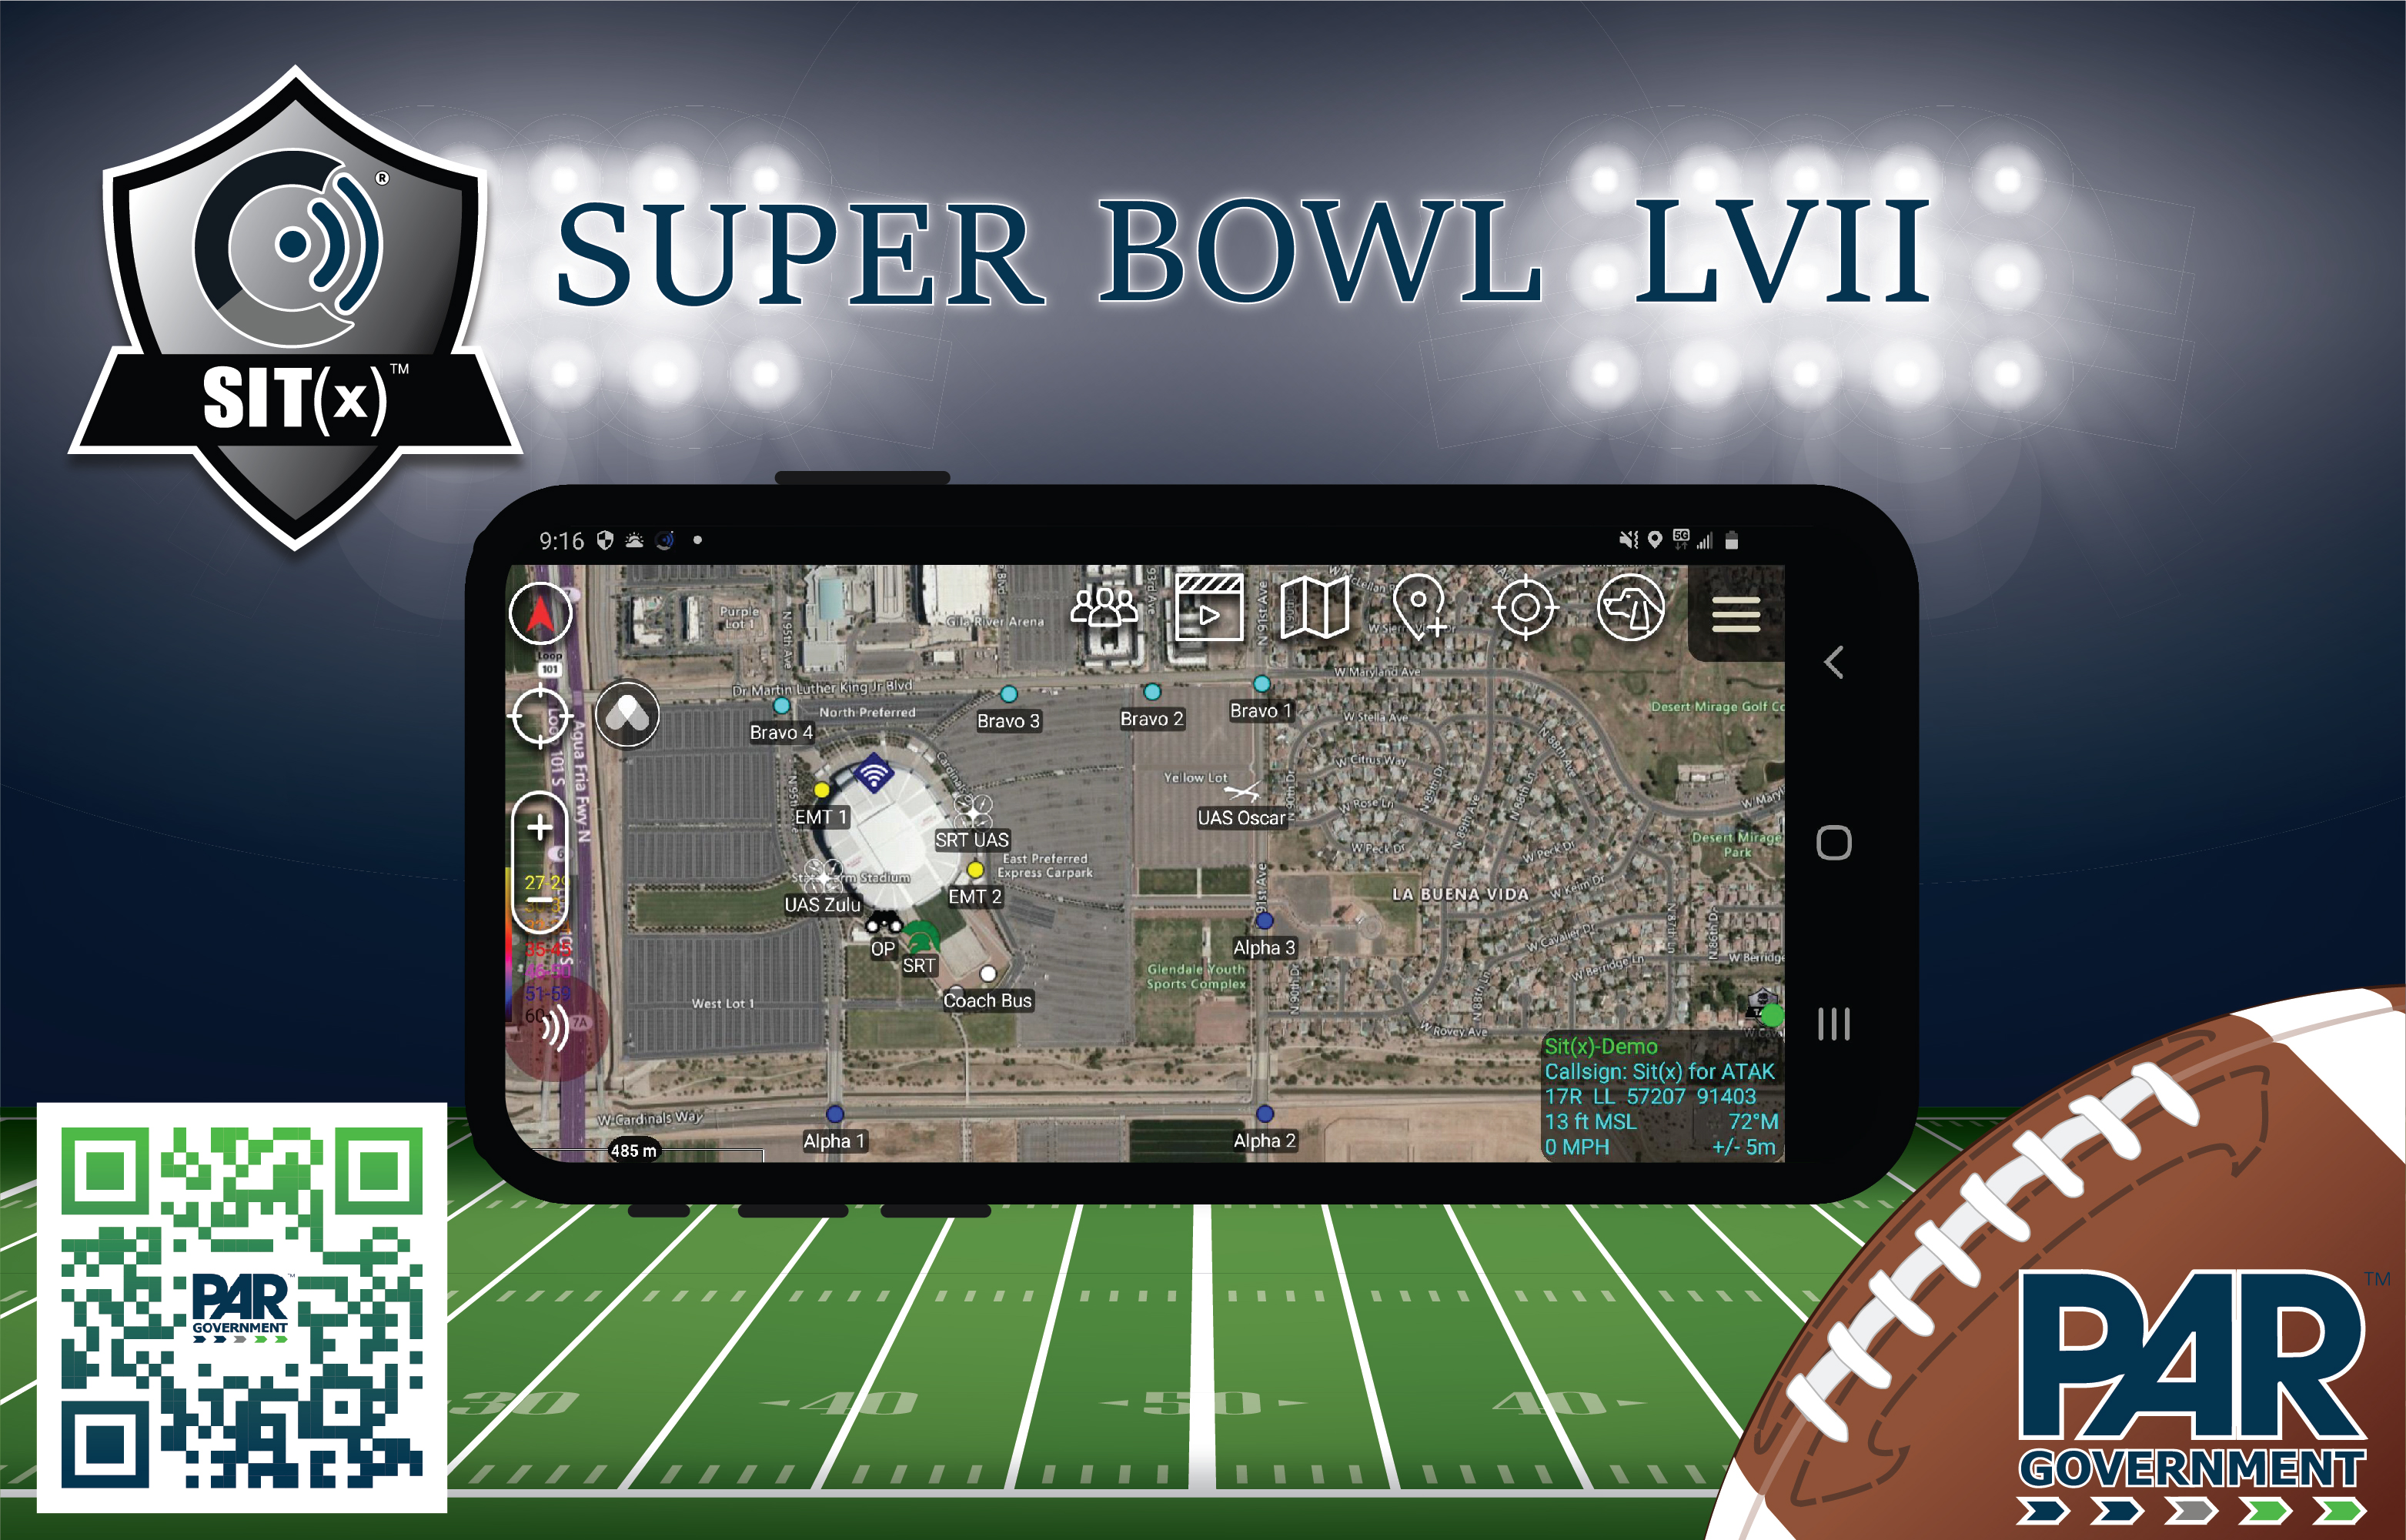 At PAR Government, we focus on more than the Big Game. During the Super Bowl, #ATAK and Sit(x)™ played a pivotal role in providing real-time situational awareness for multiple federated agencies to see, share, and communicate with each other. 